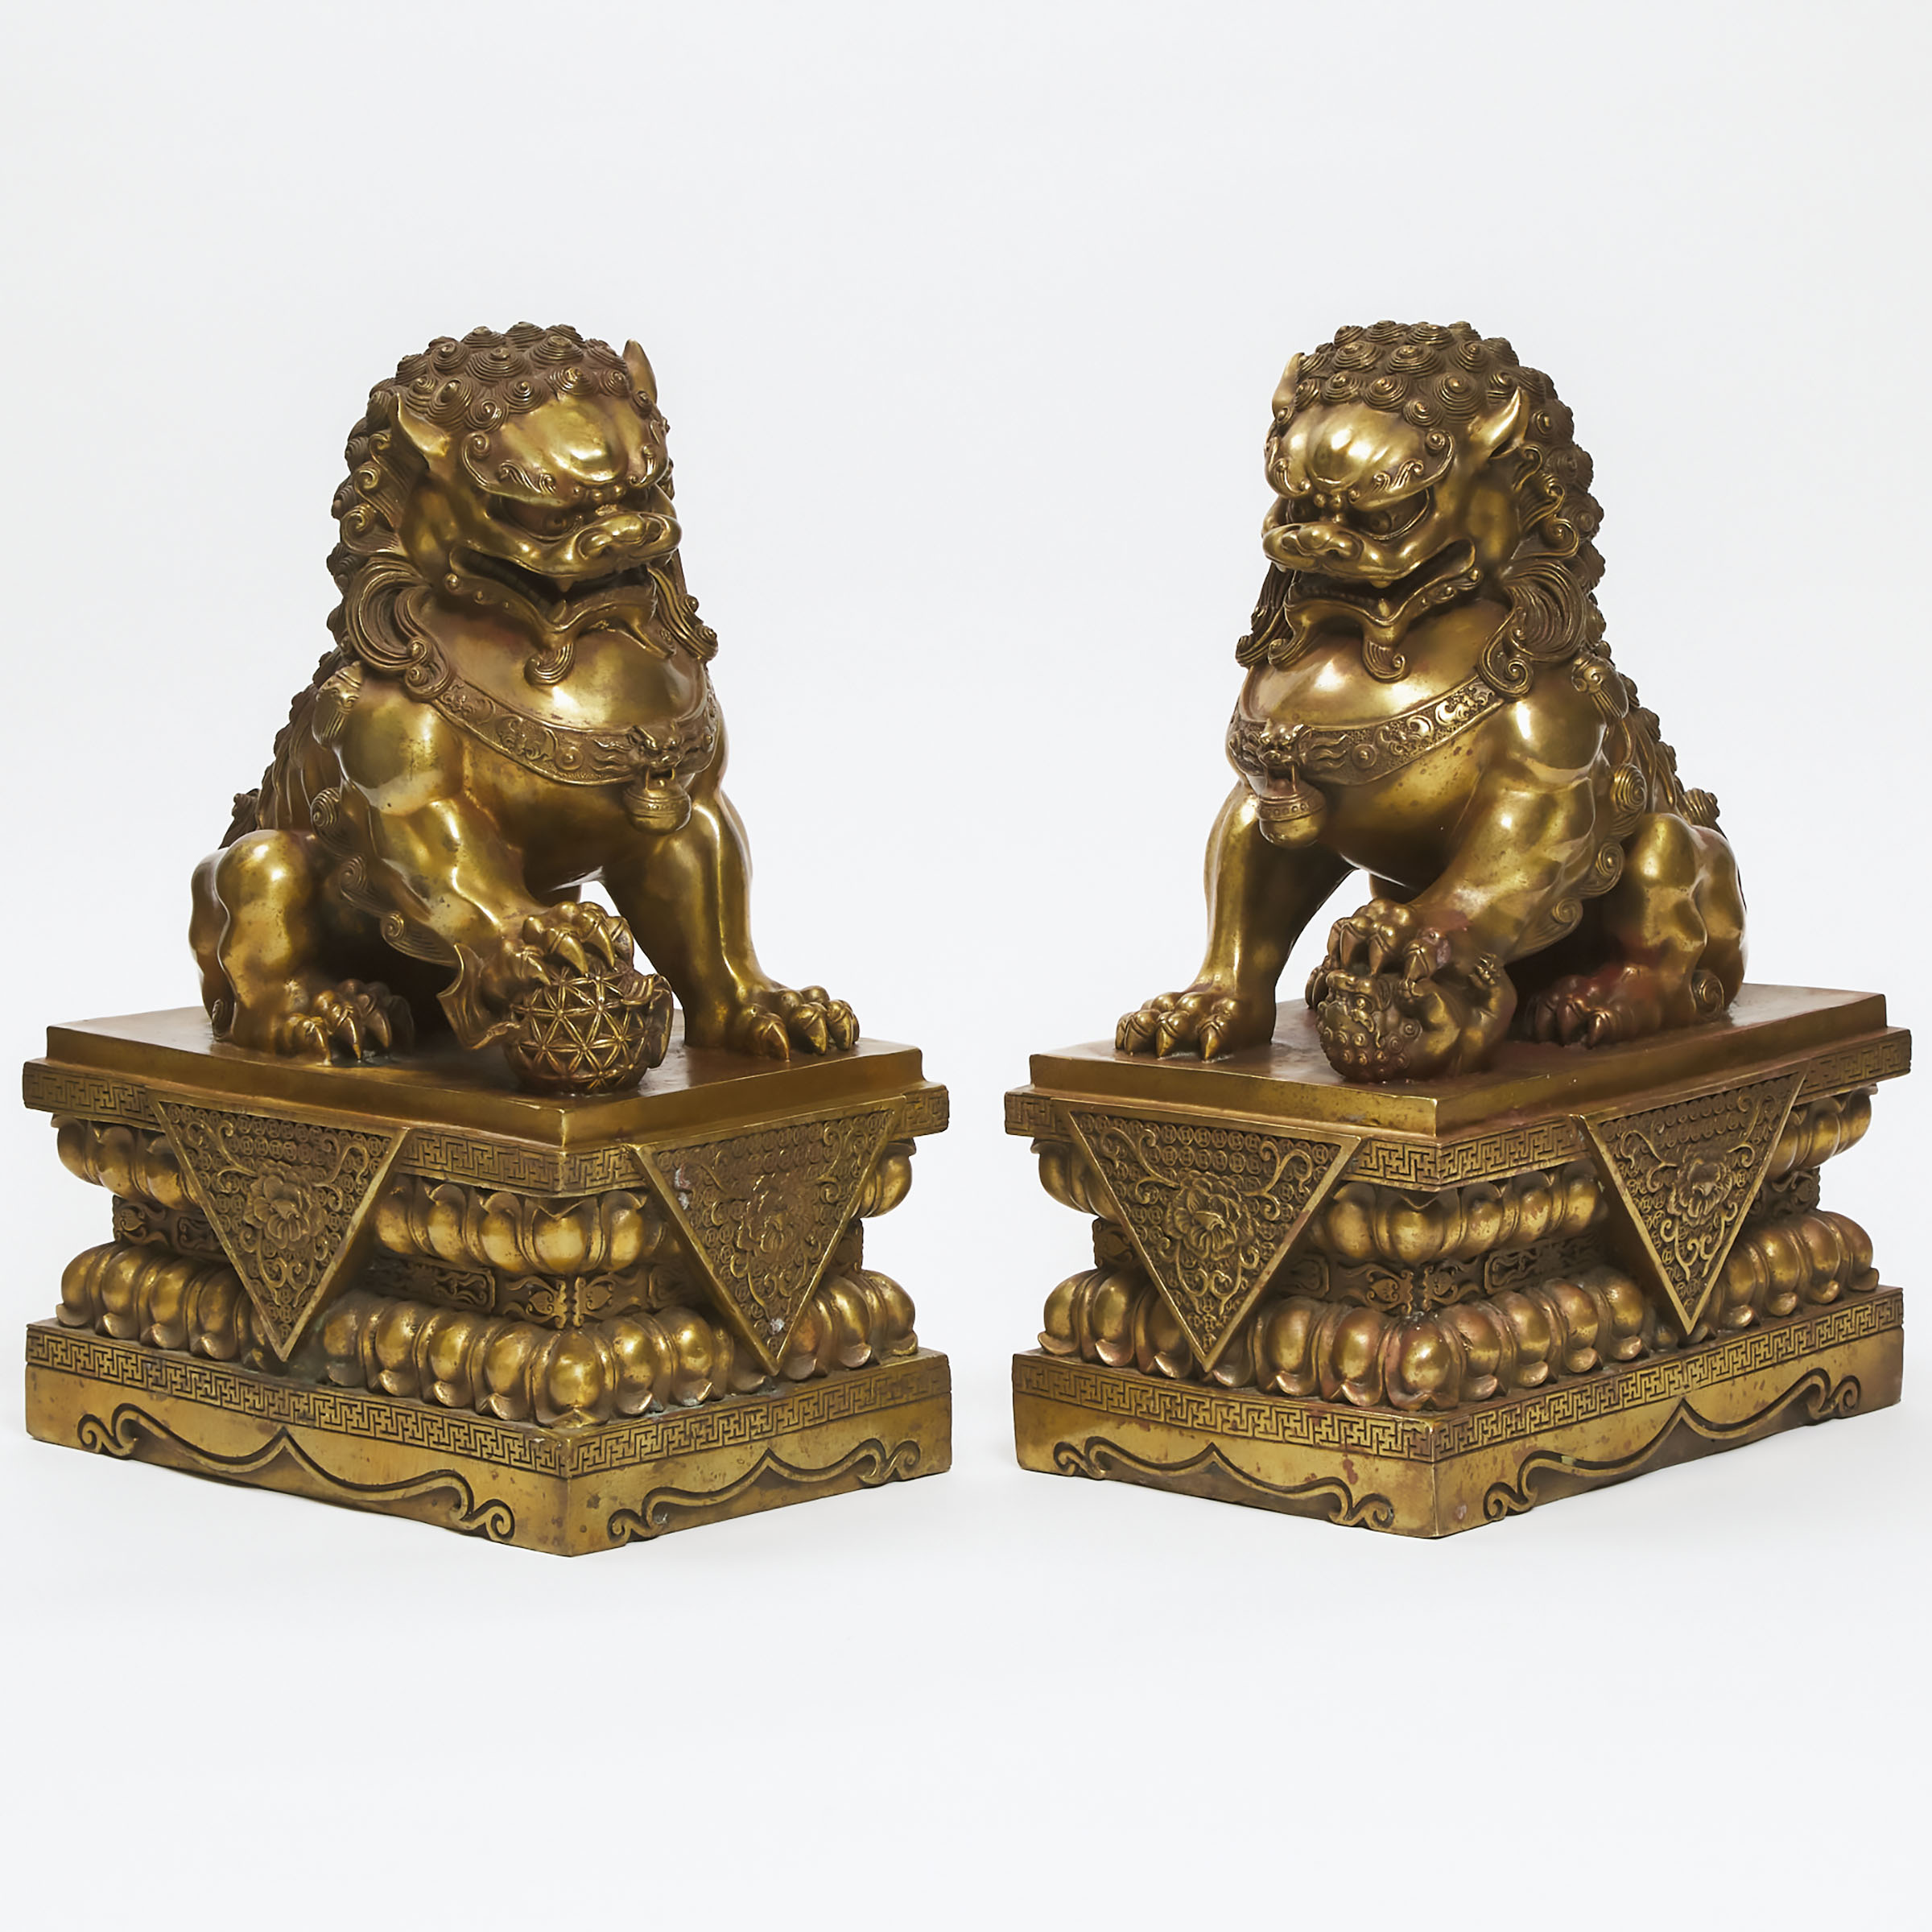 Large Pair of Buddhist Gilt Bronze Foo Dogs, early 20th century